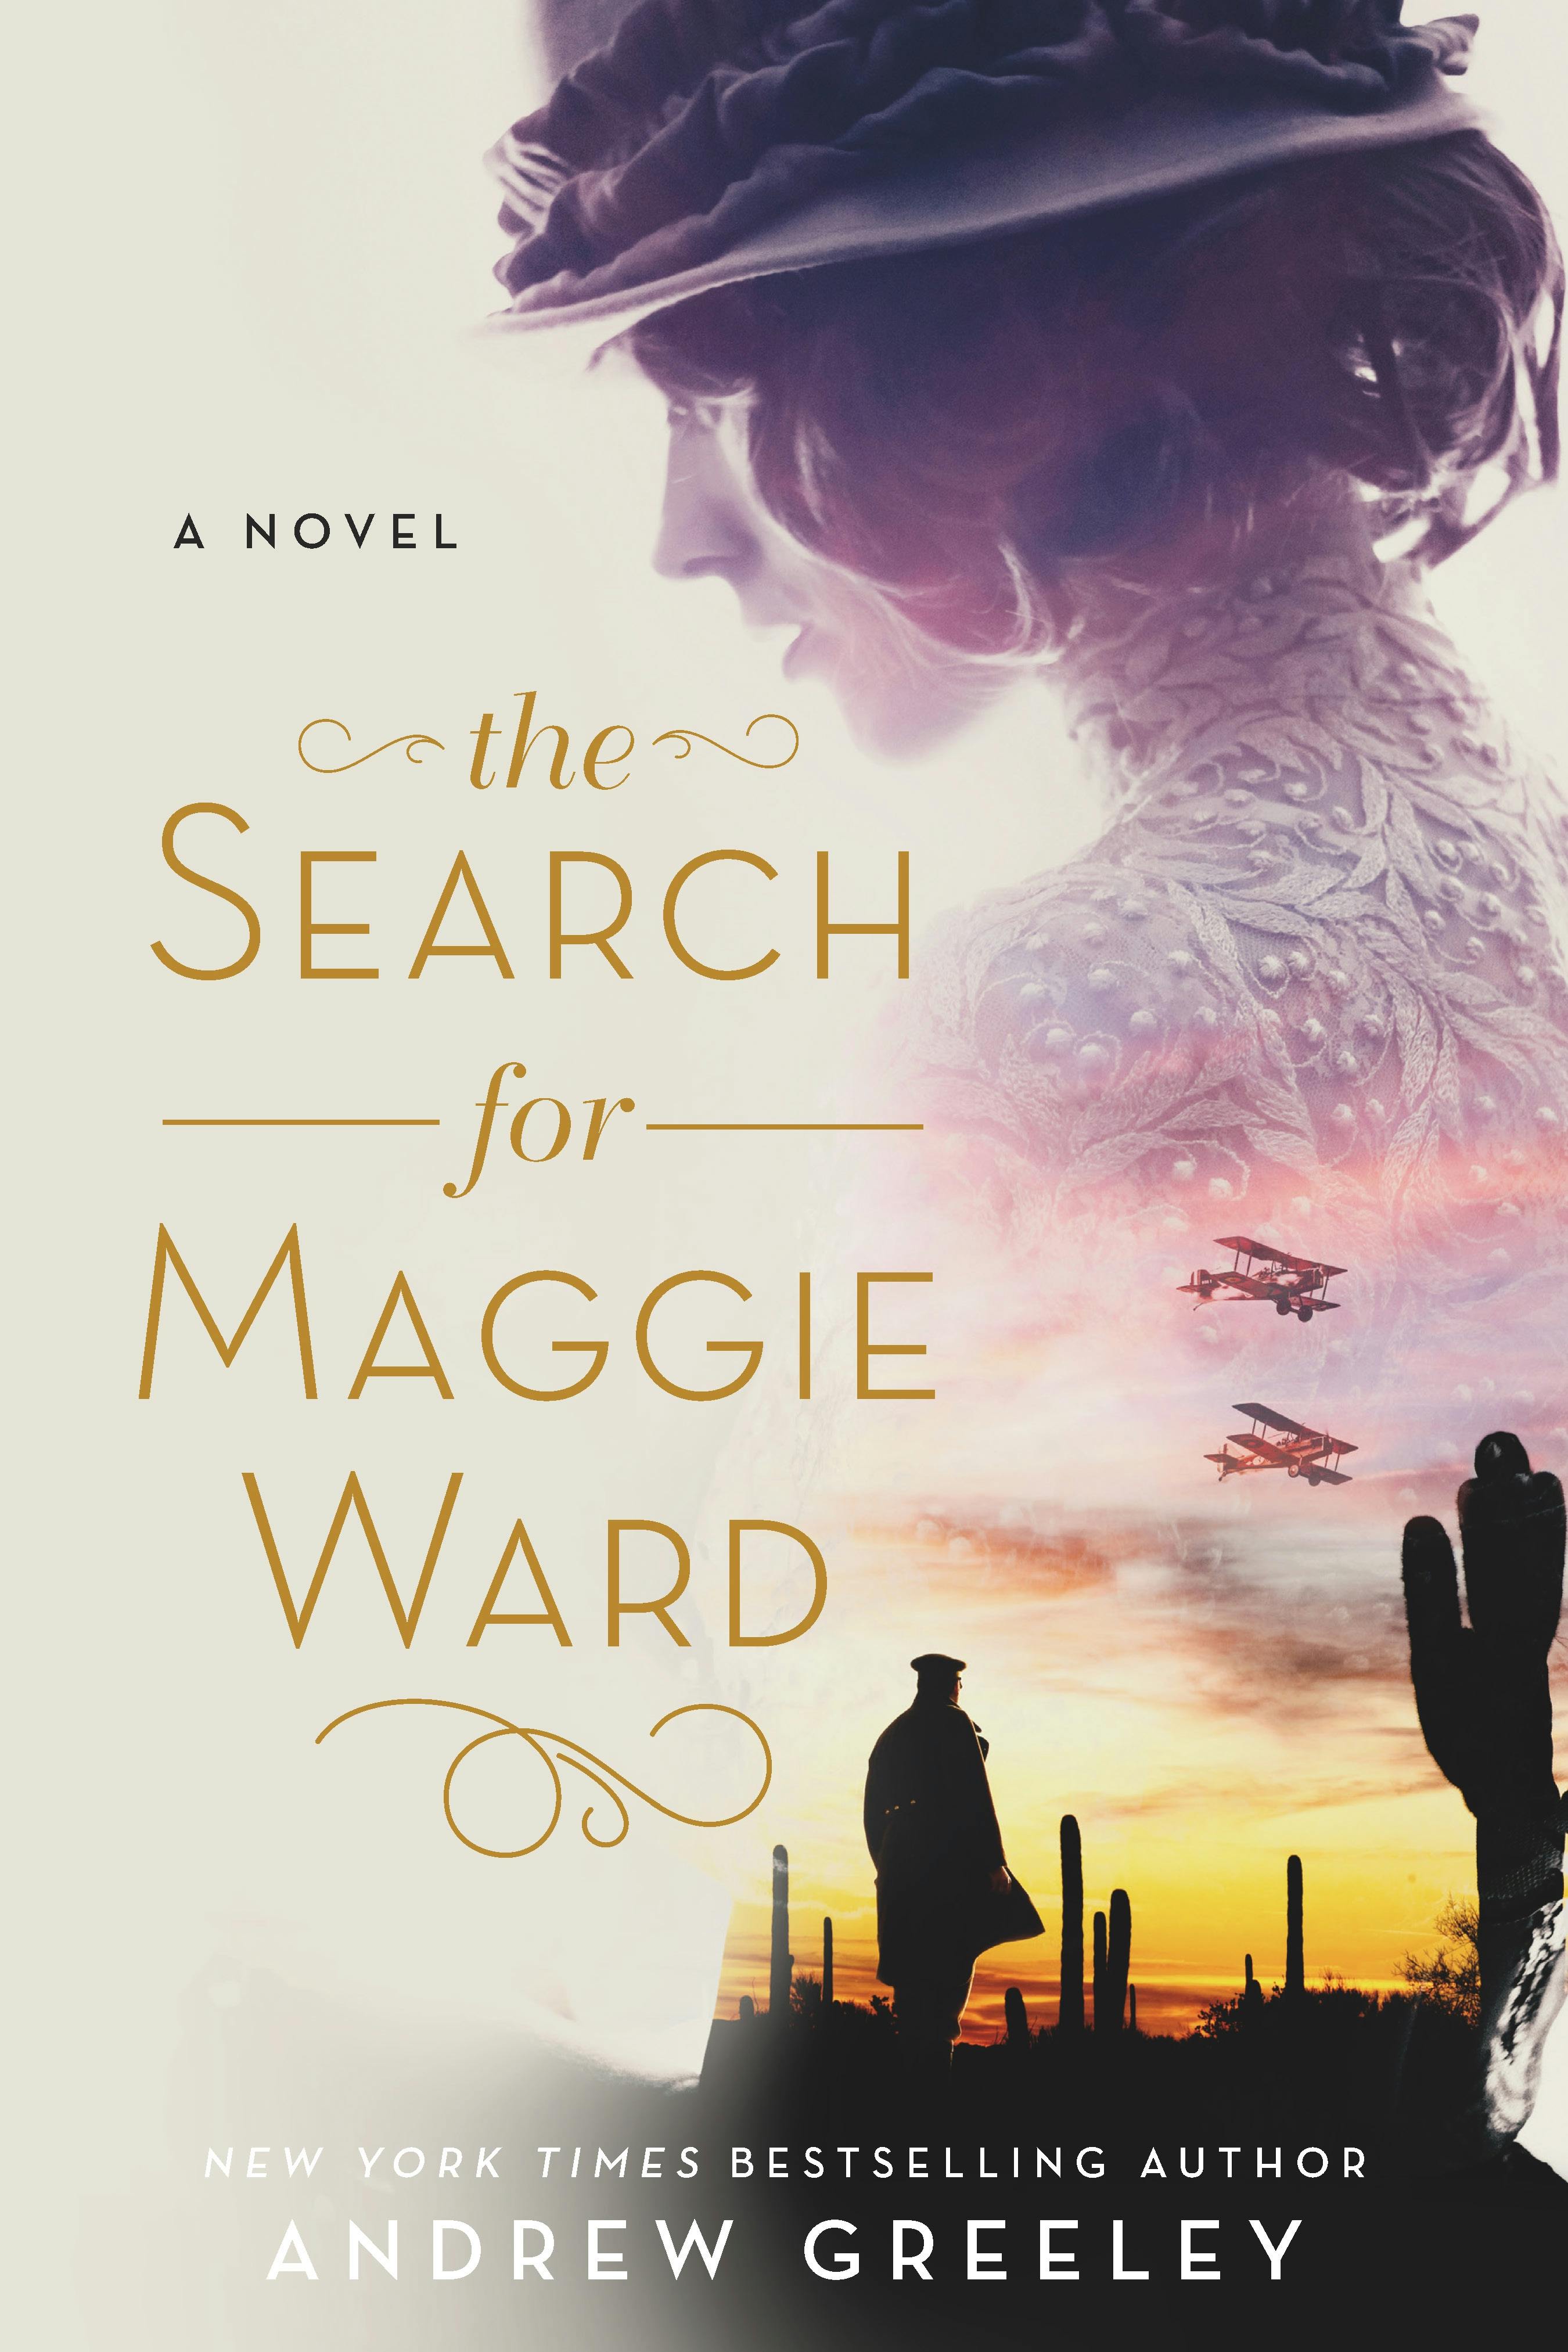 Cover for the book titled as: The Search for Maggie Ward